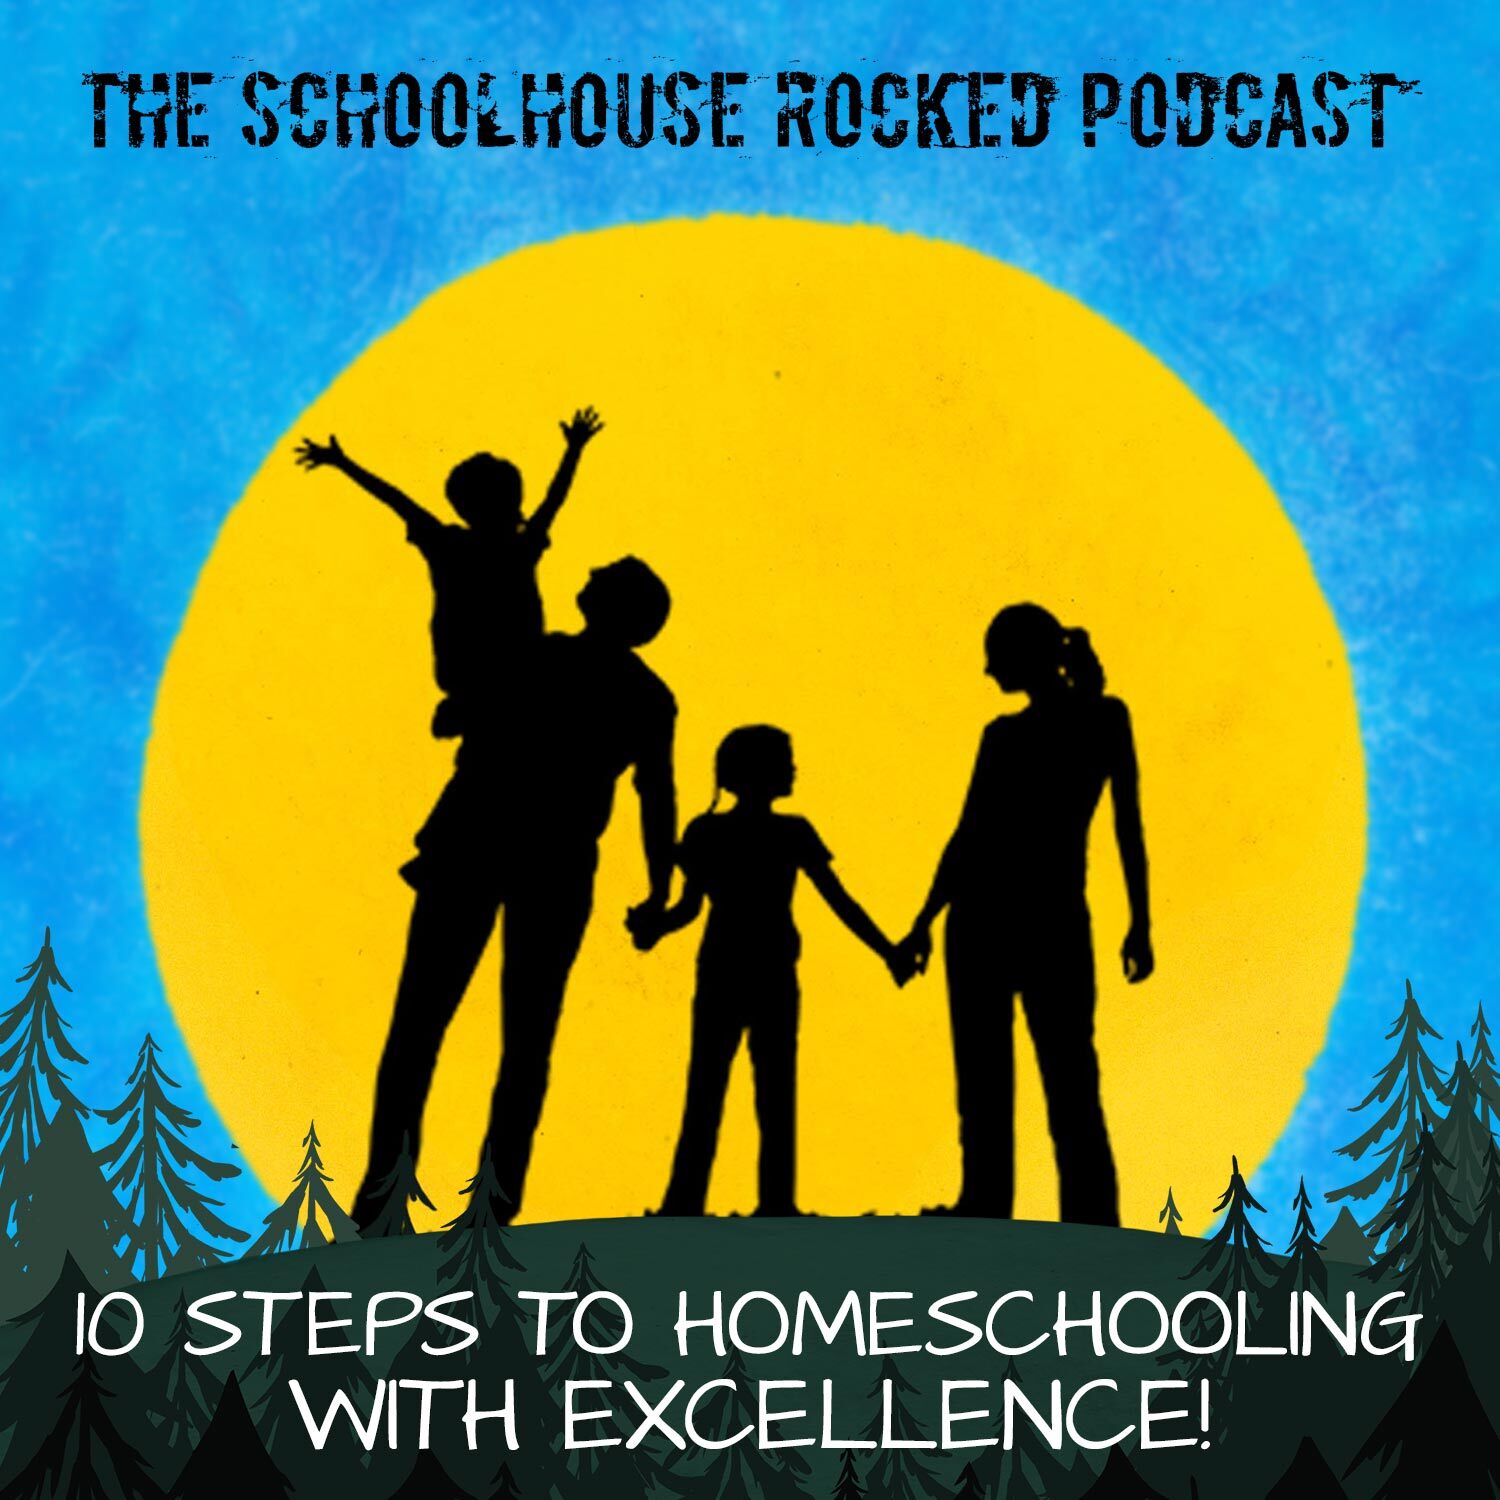 10 Steps to Homeschooling with Excellence